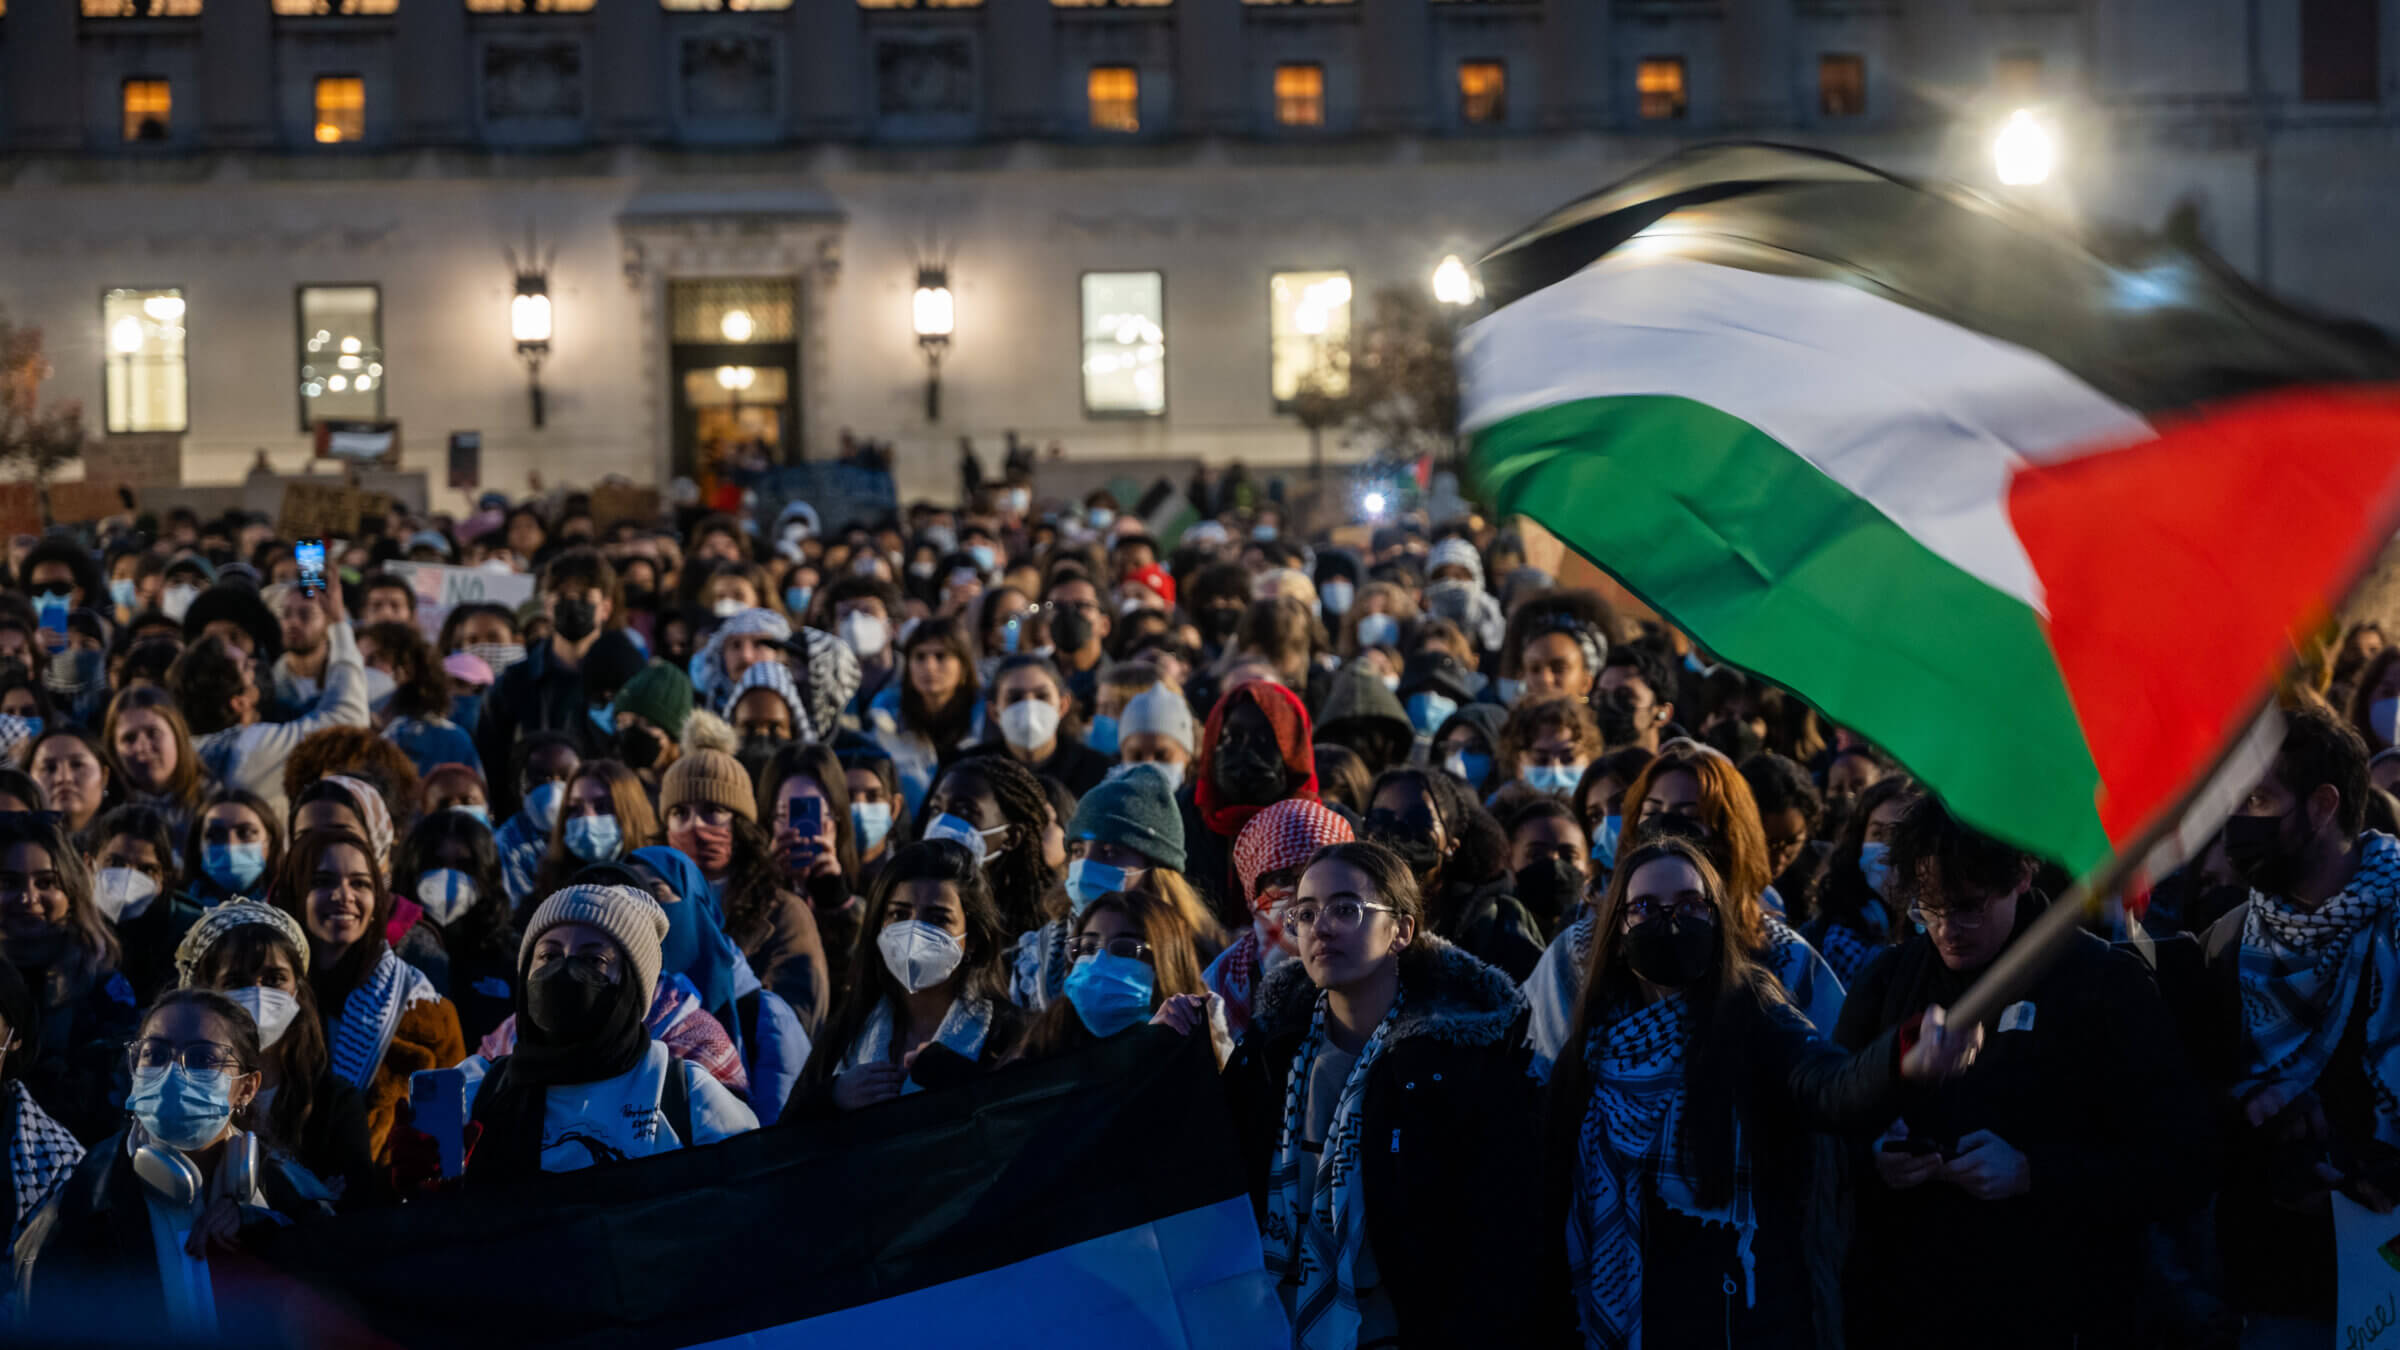 Students participate in a protest at Columbia University last month, after the school suspended its chapters of Students for Justice in Palestine and Jewish Voice for Peace.